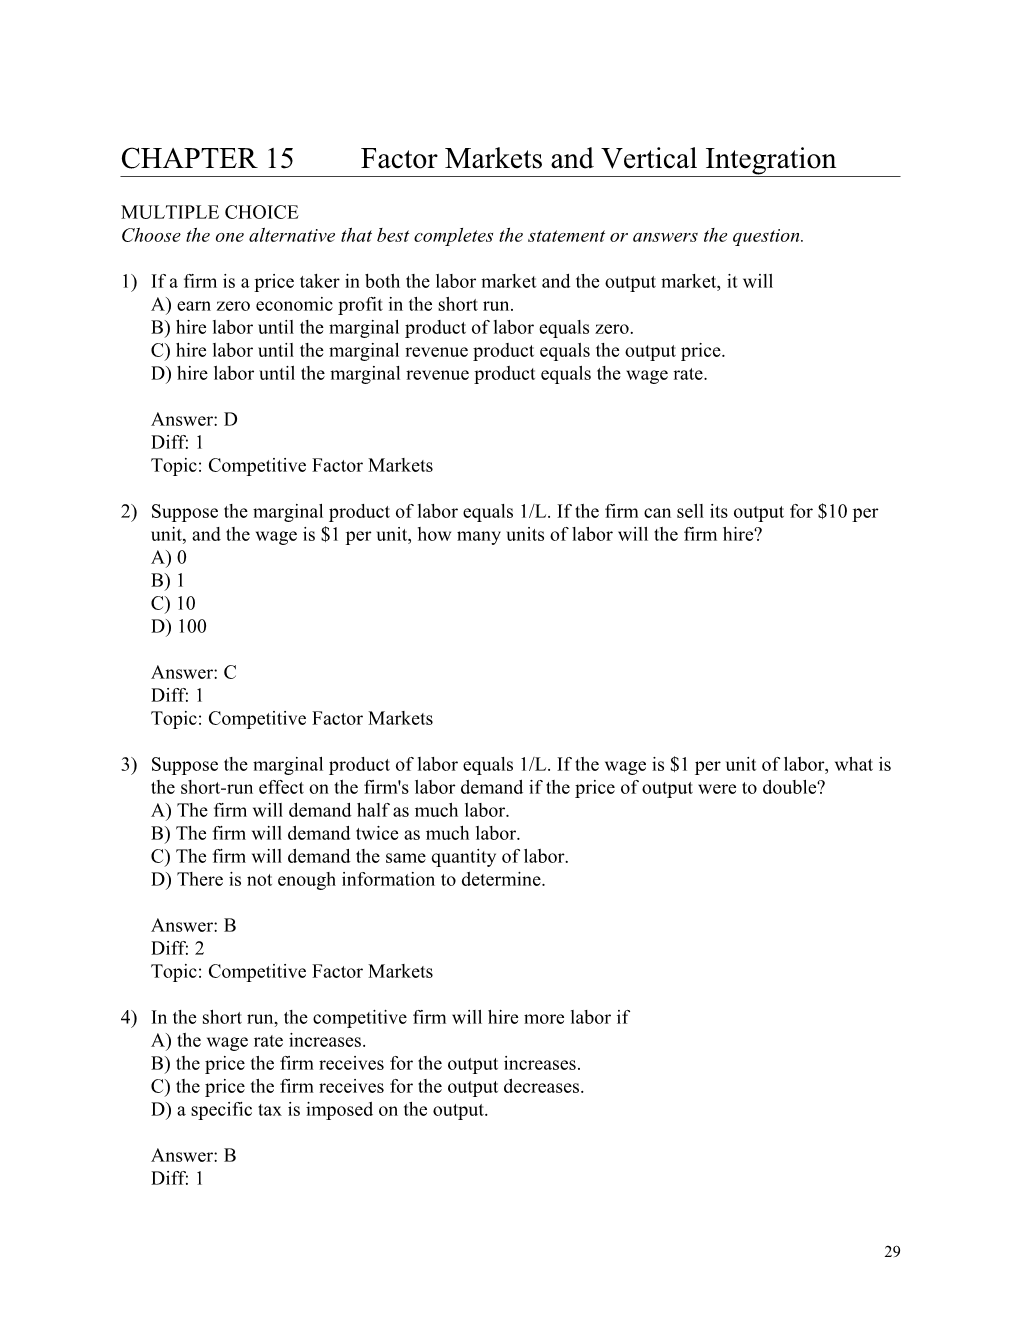 Chapter 15/Factor Markets and Vertical Integration